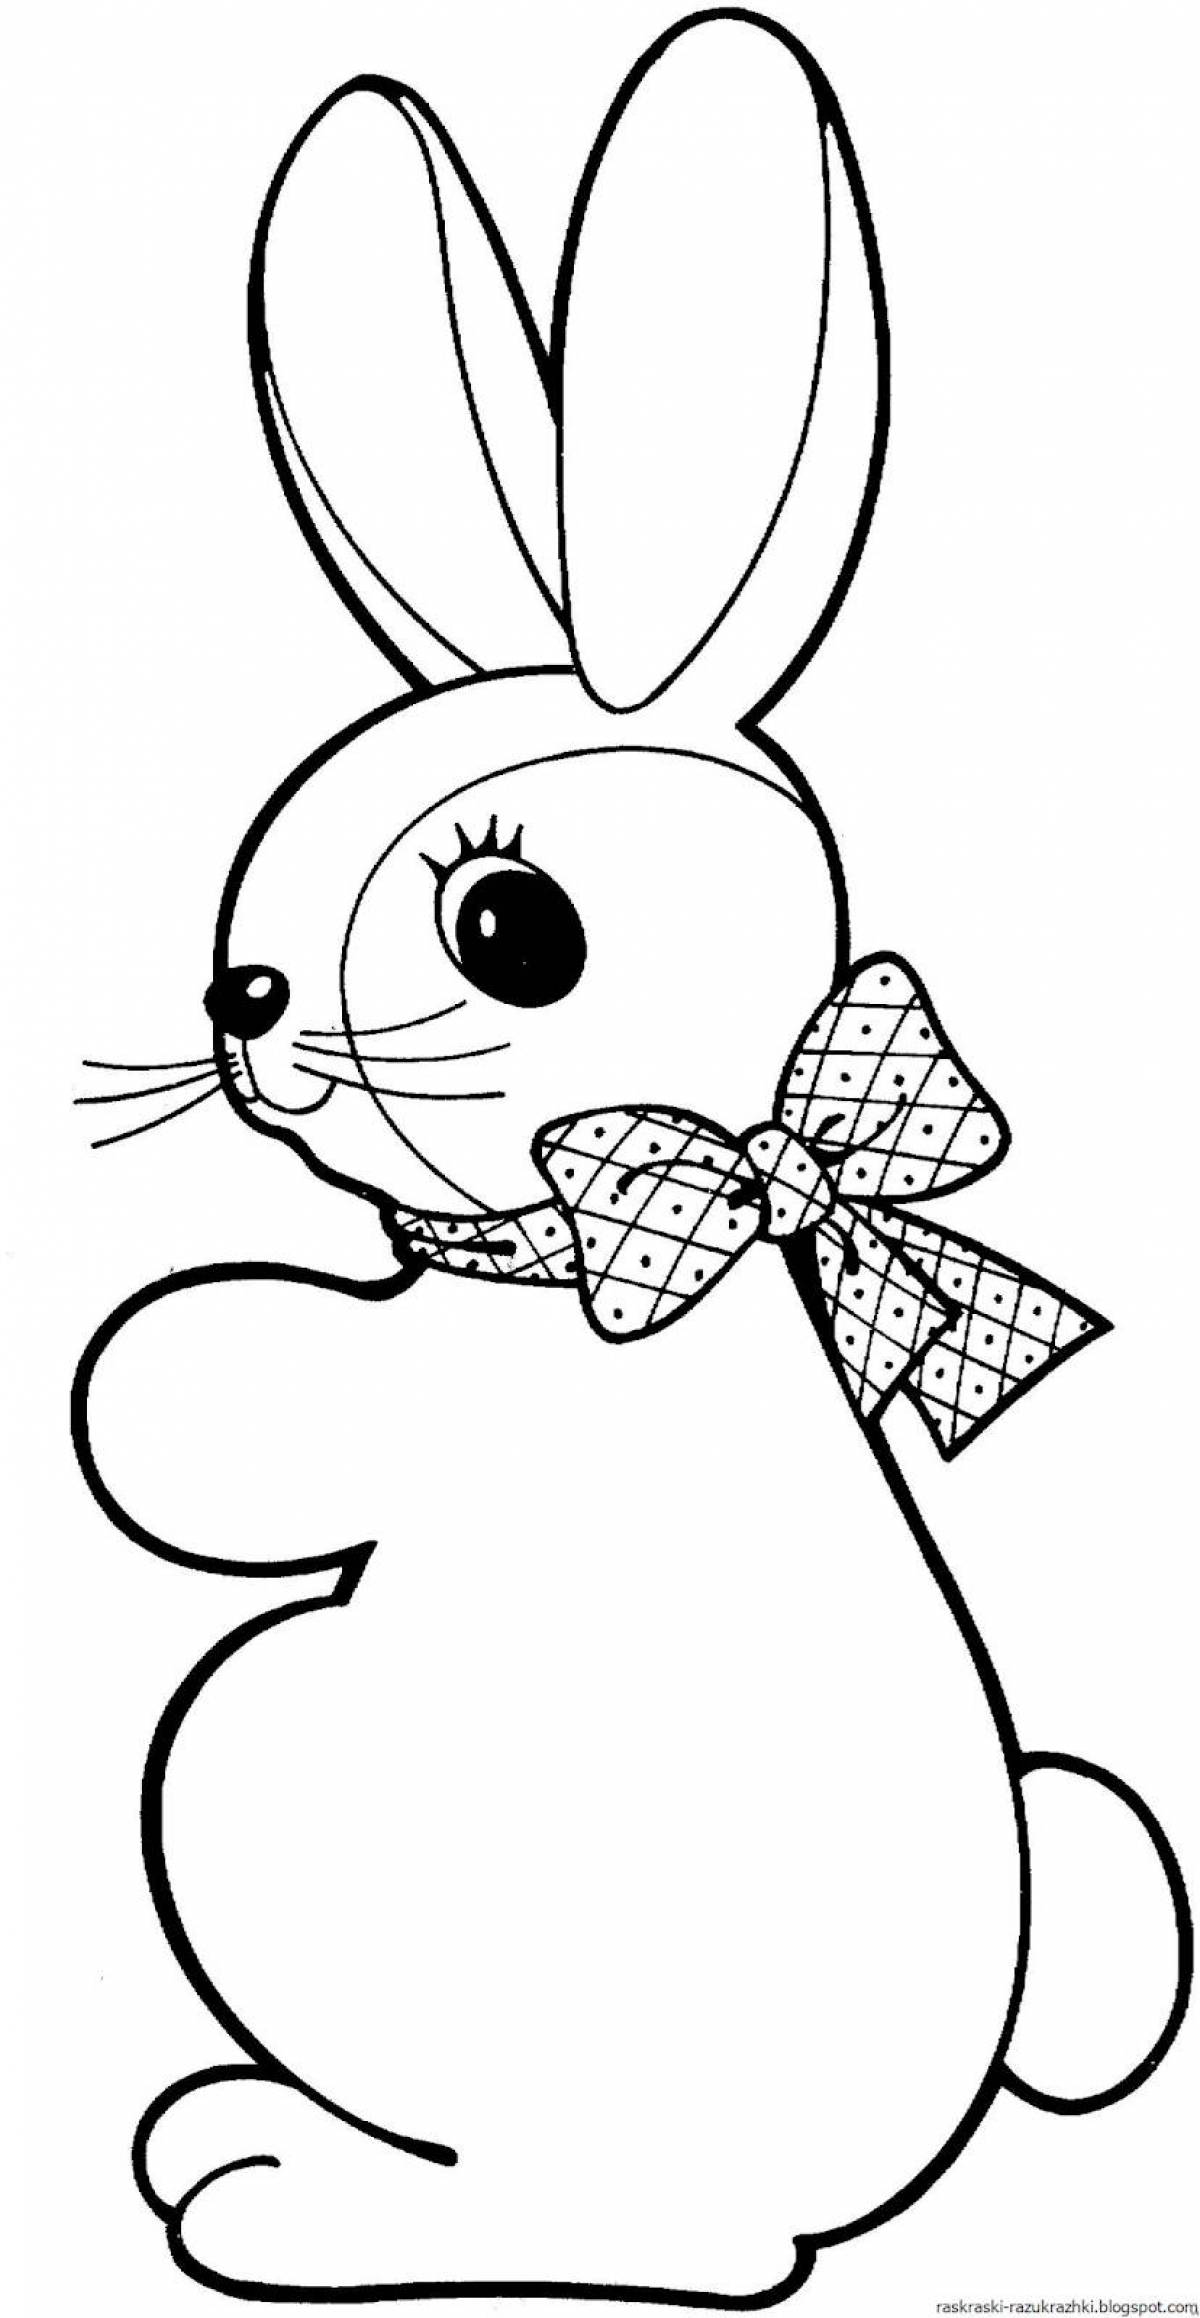 Excited bunny coloring book